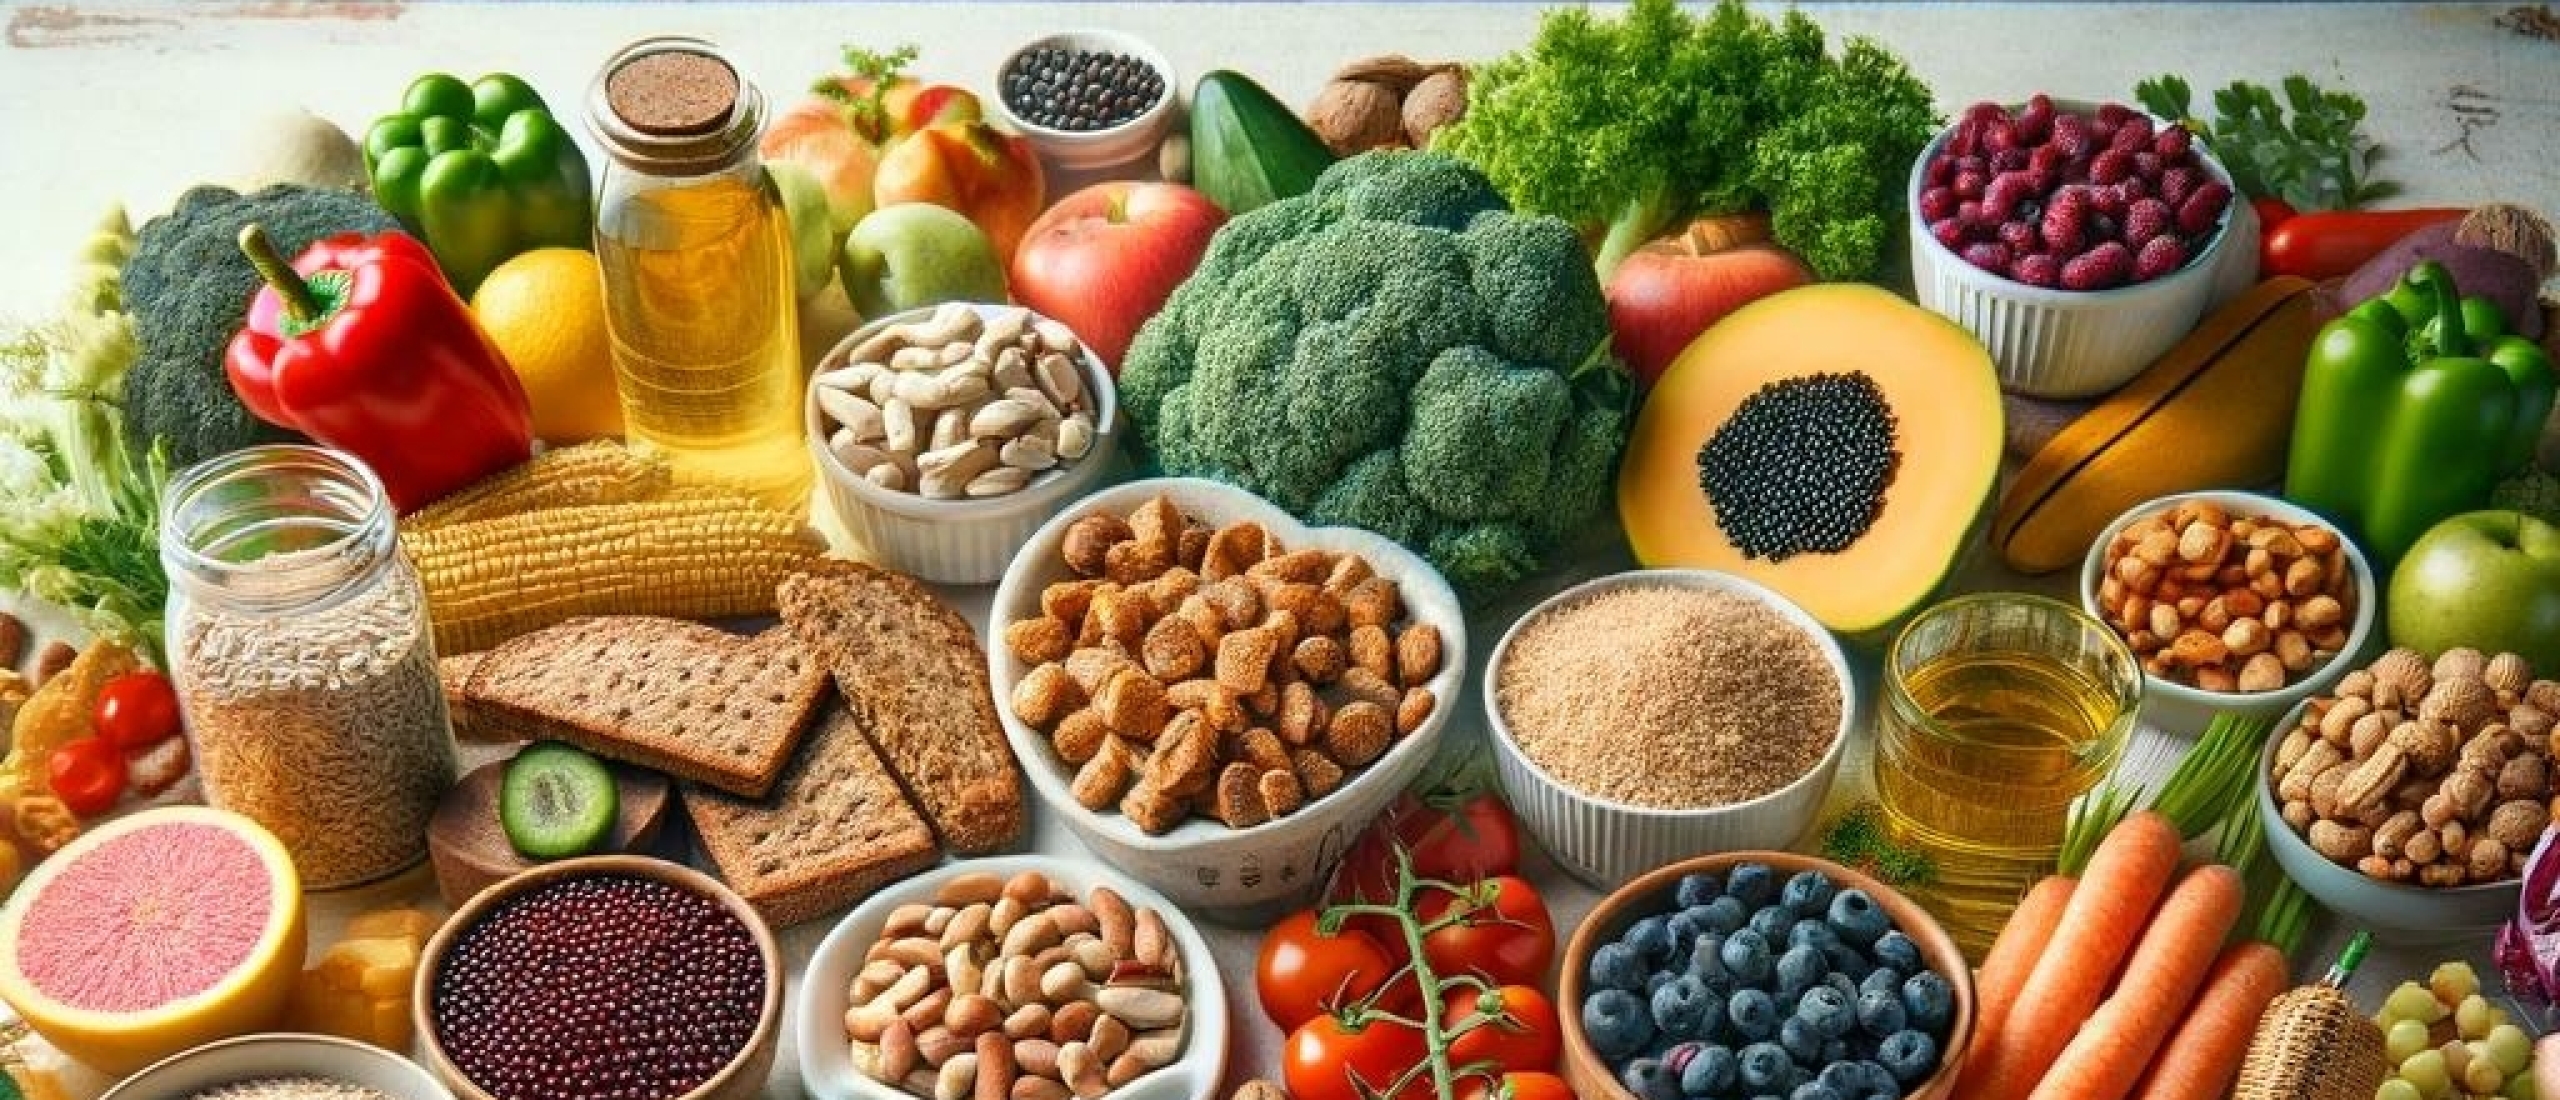 healthy_carbohydrates_nutrient_rich_foods